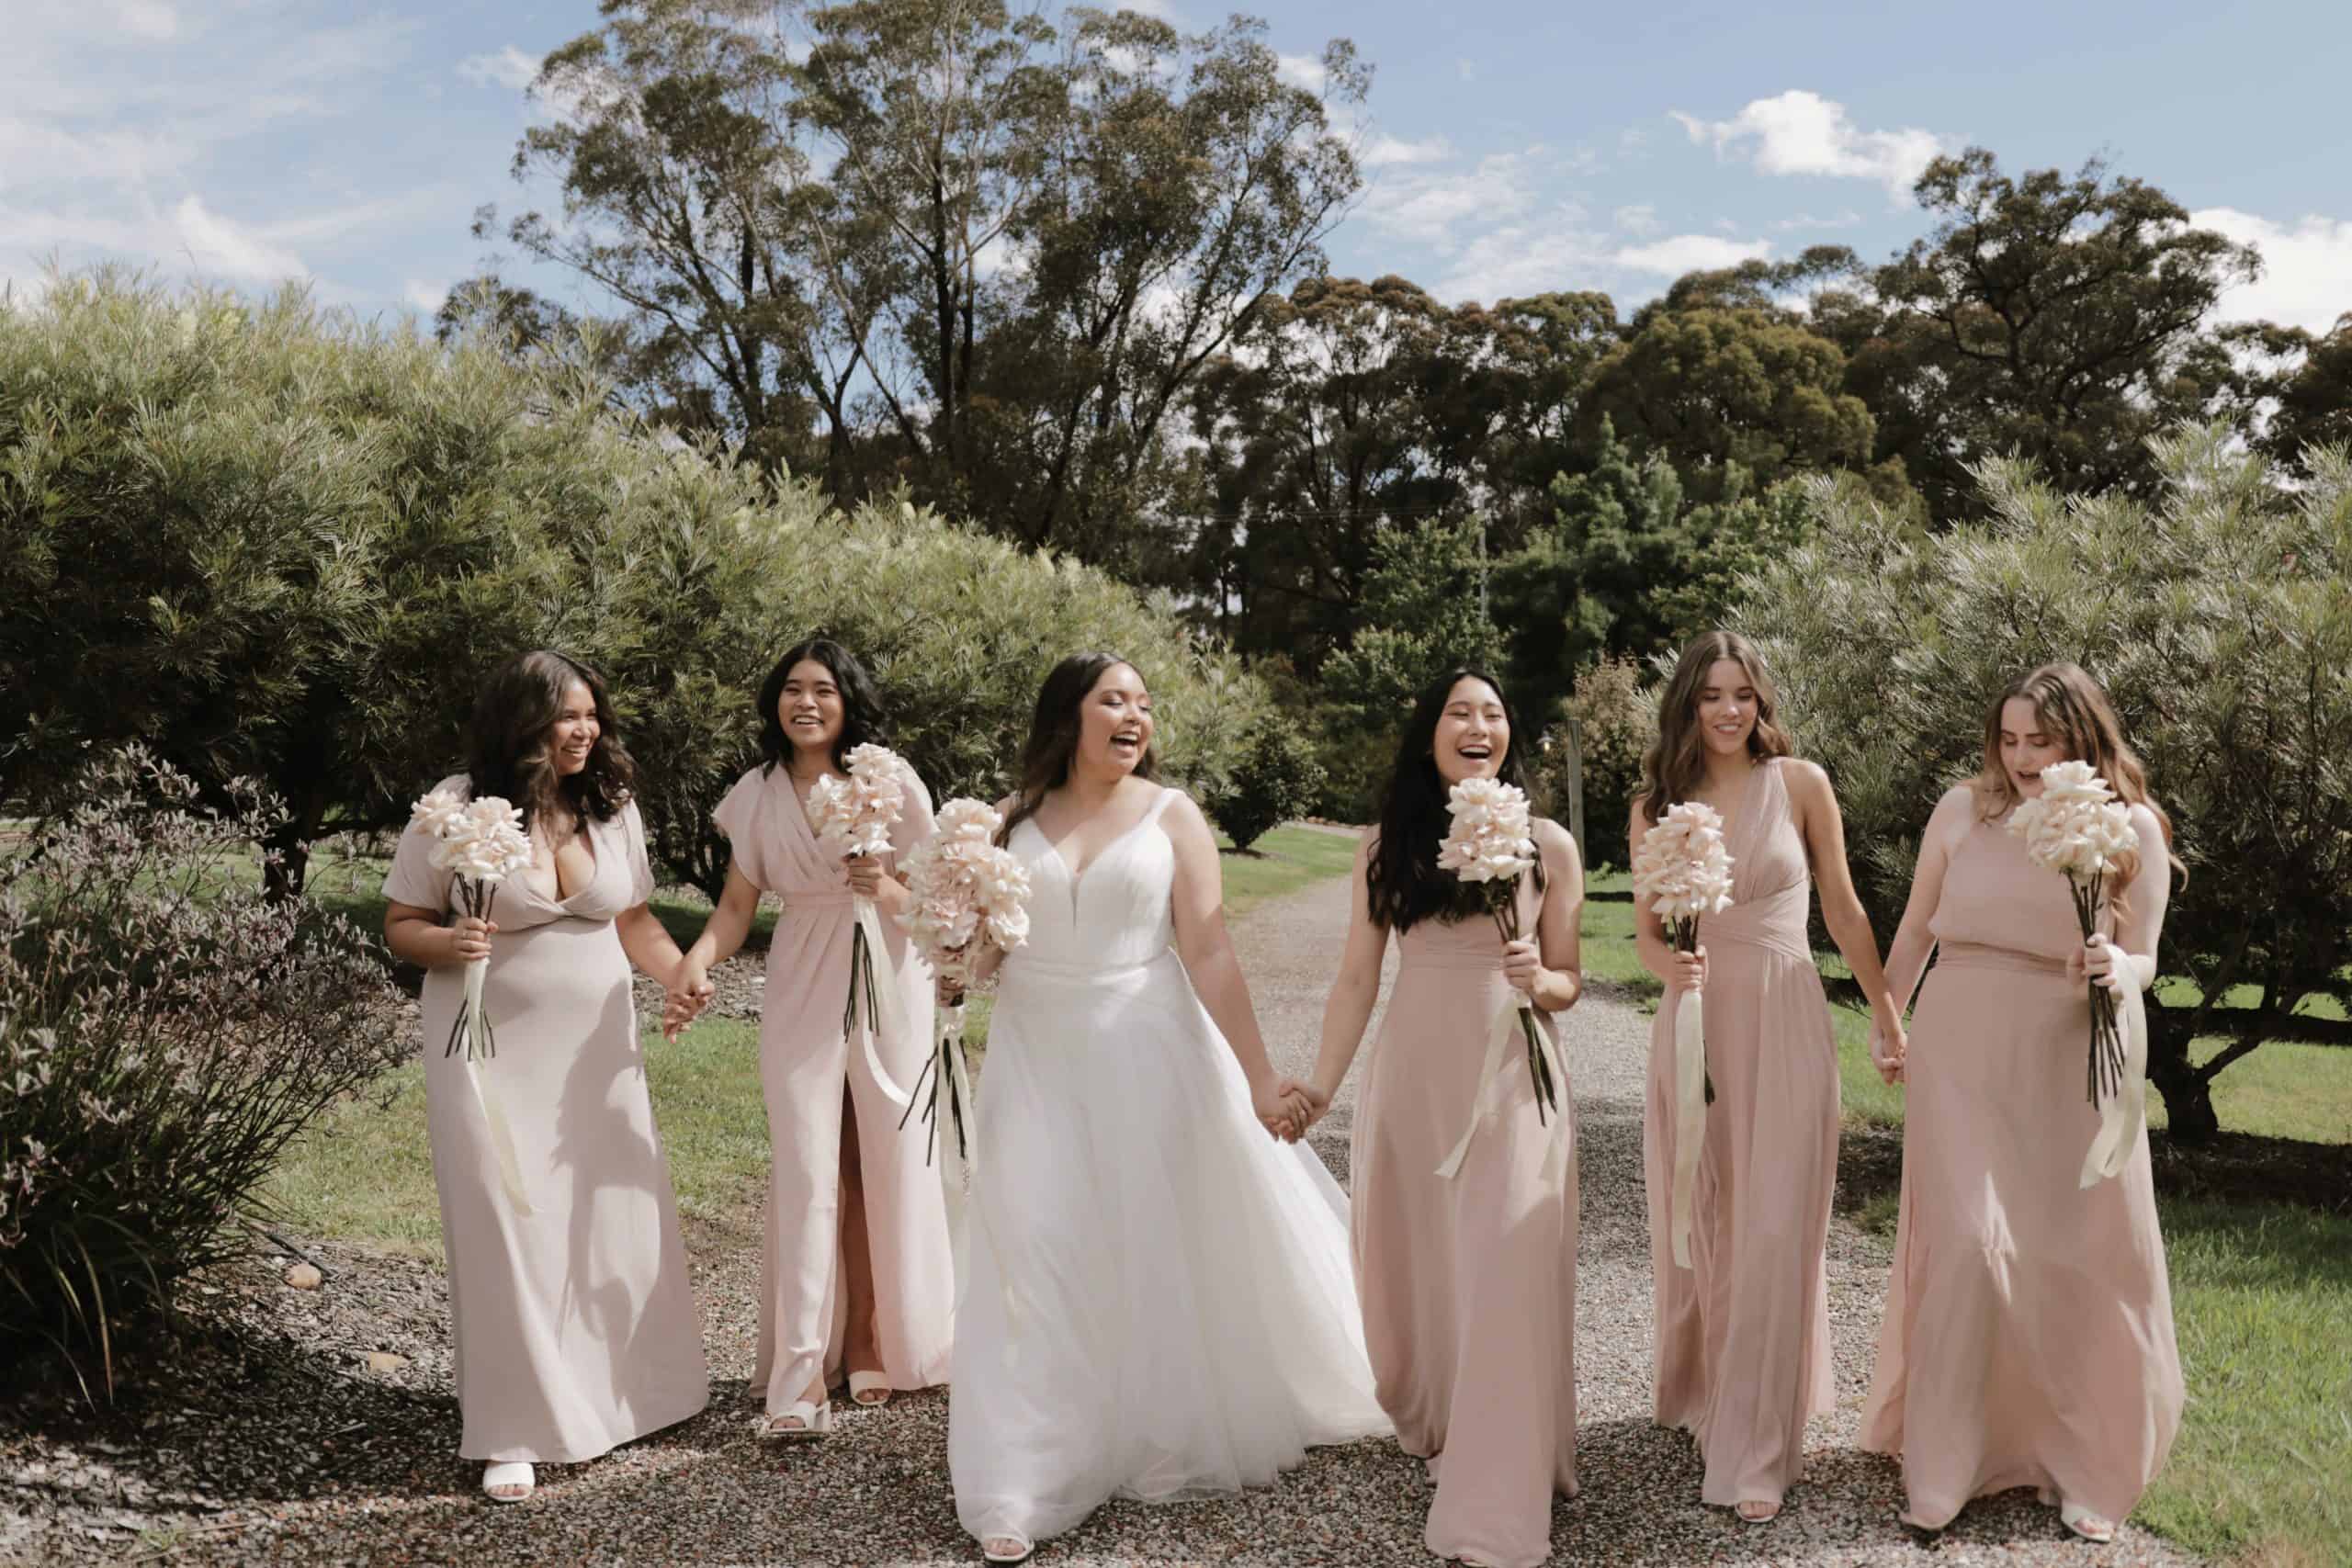 Key Points to Consider when Choosing Bridesmaid Dresses ﻿